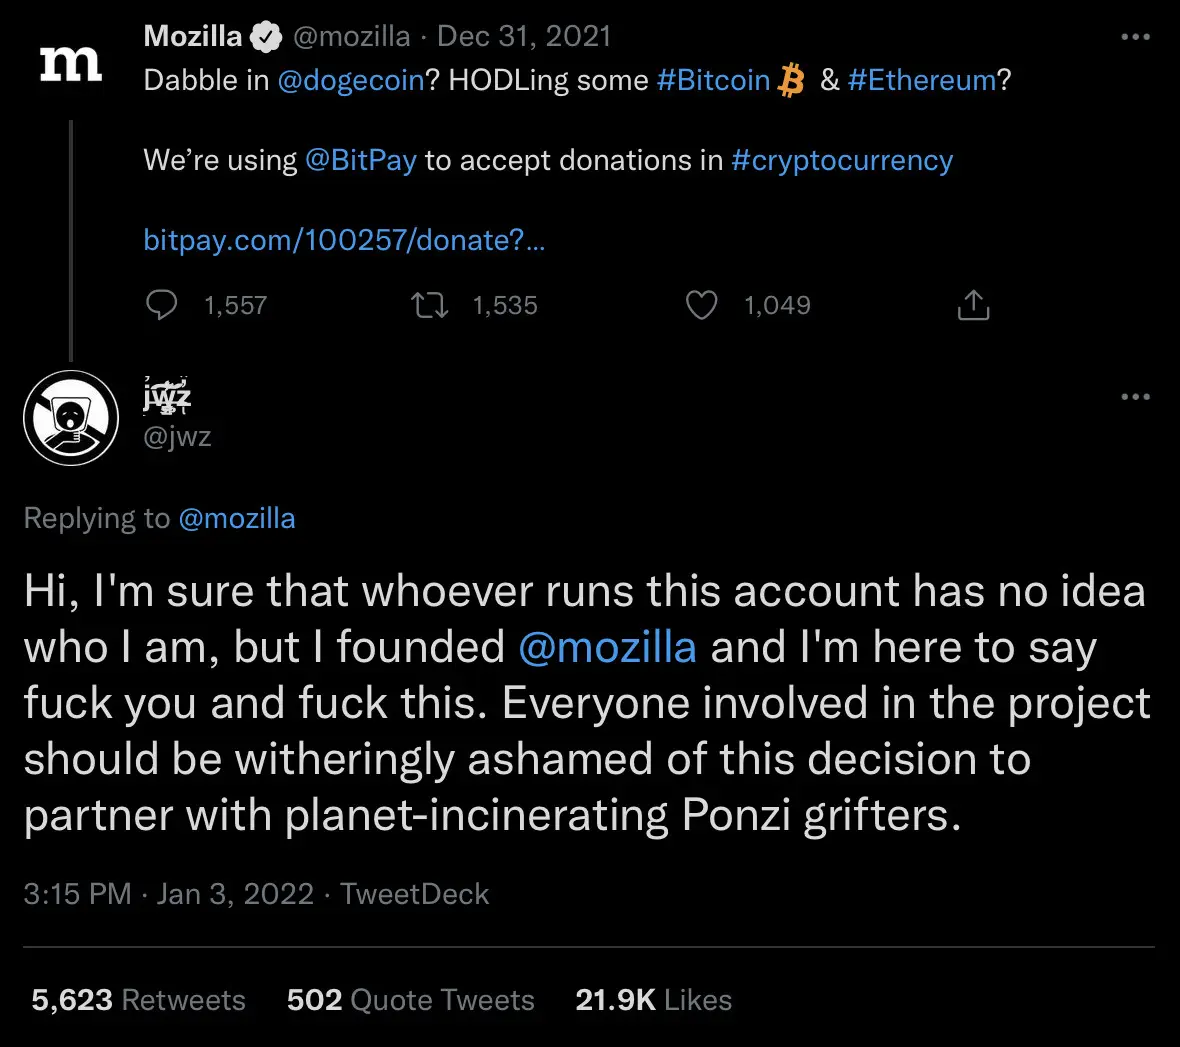 Reply from Mozilla founder in response to a Mozilla tweet about crypto